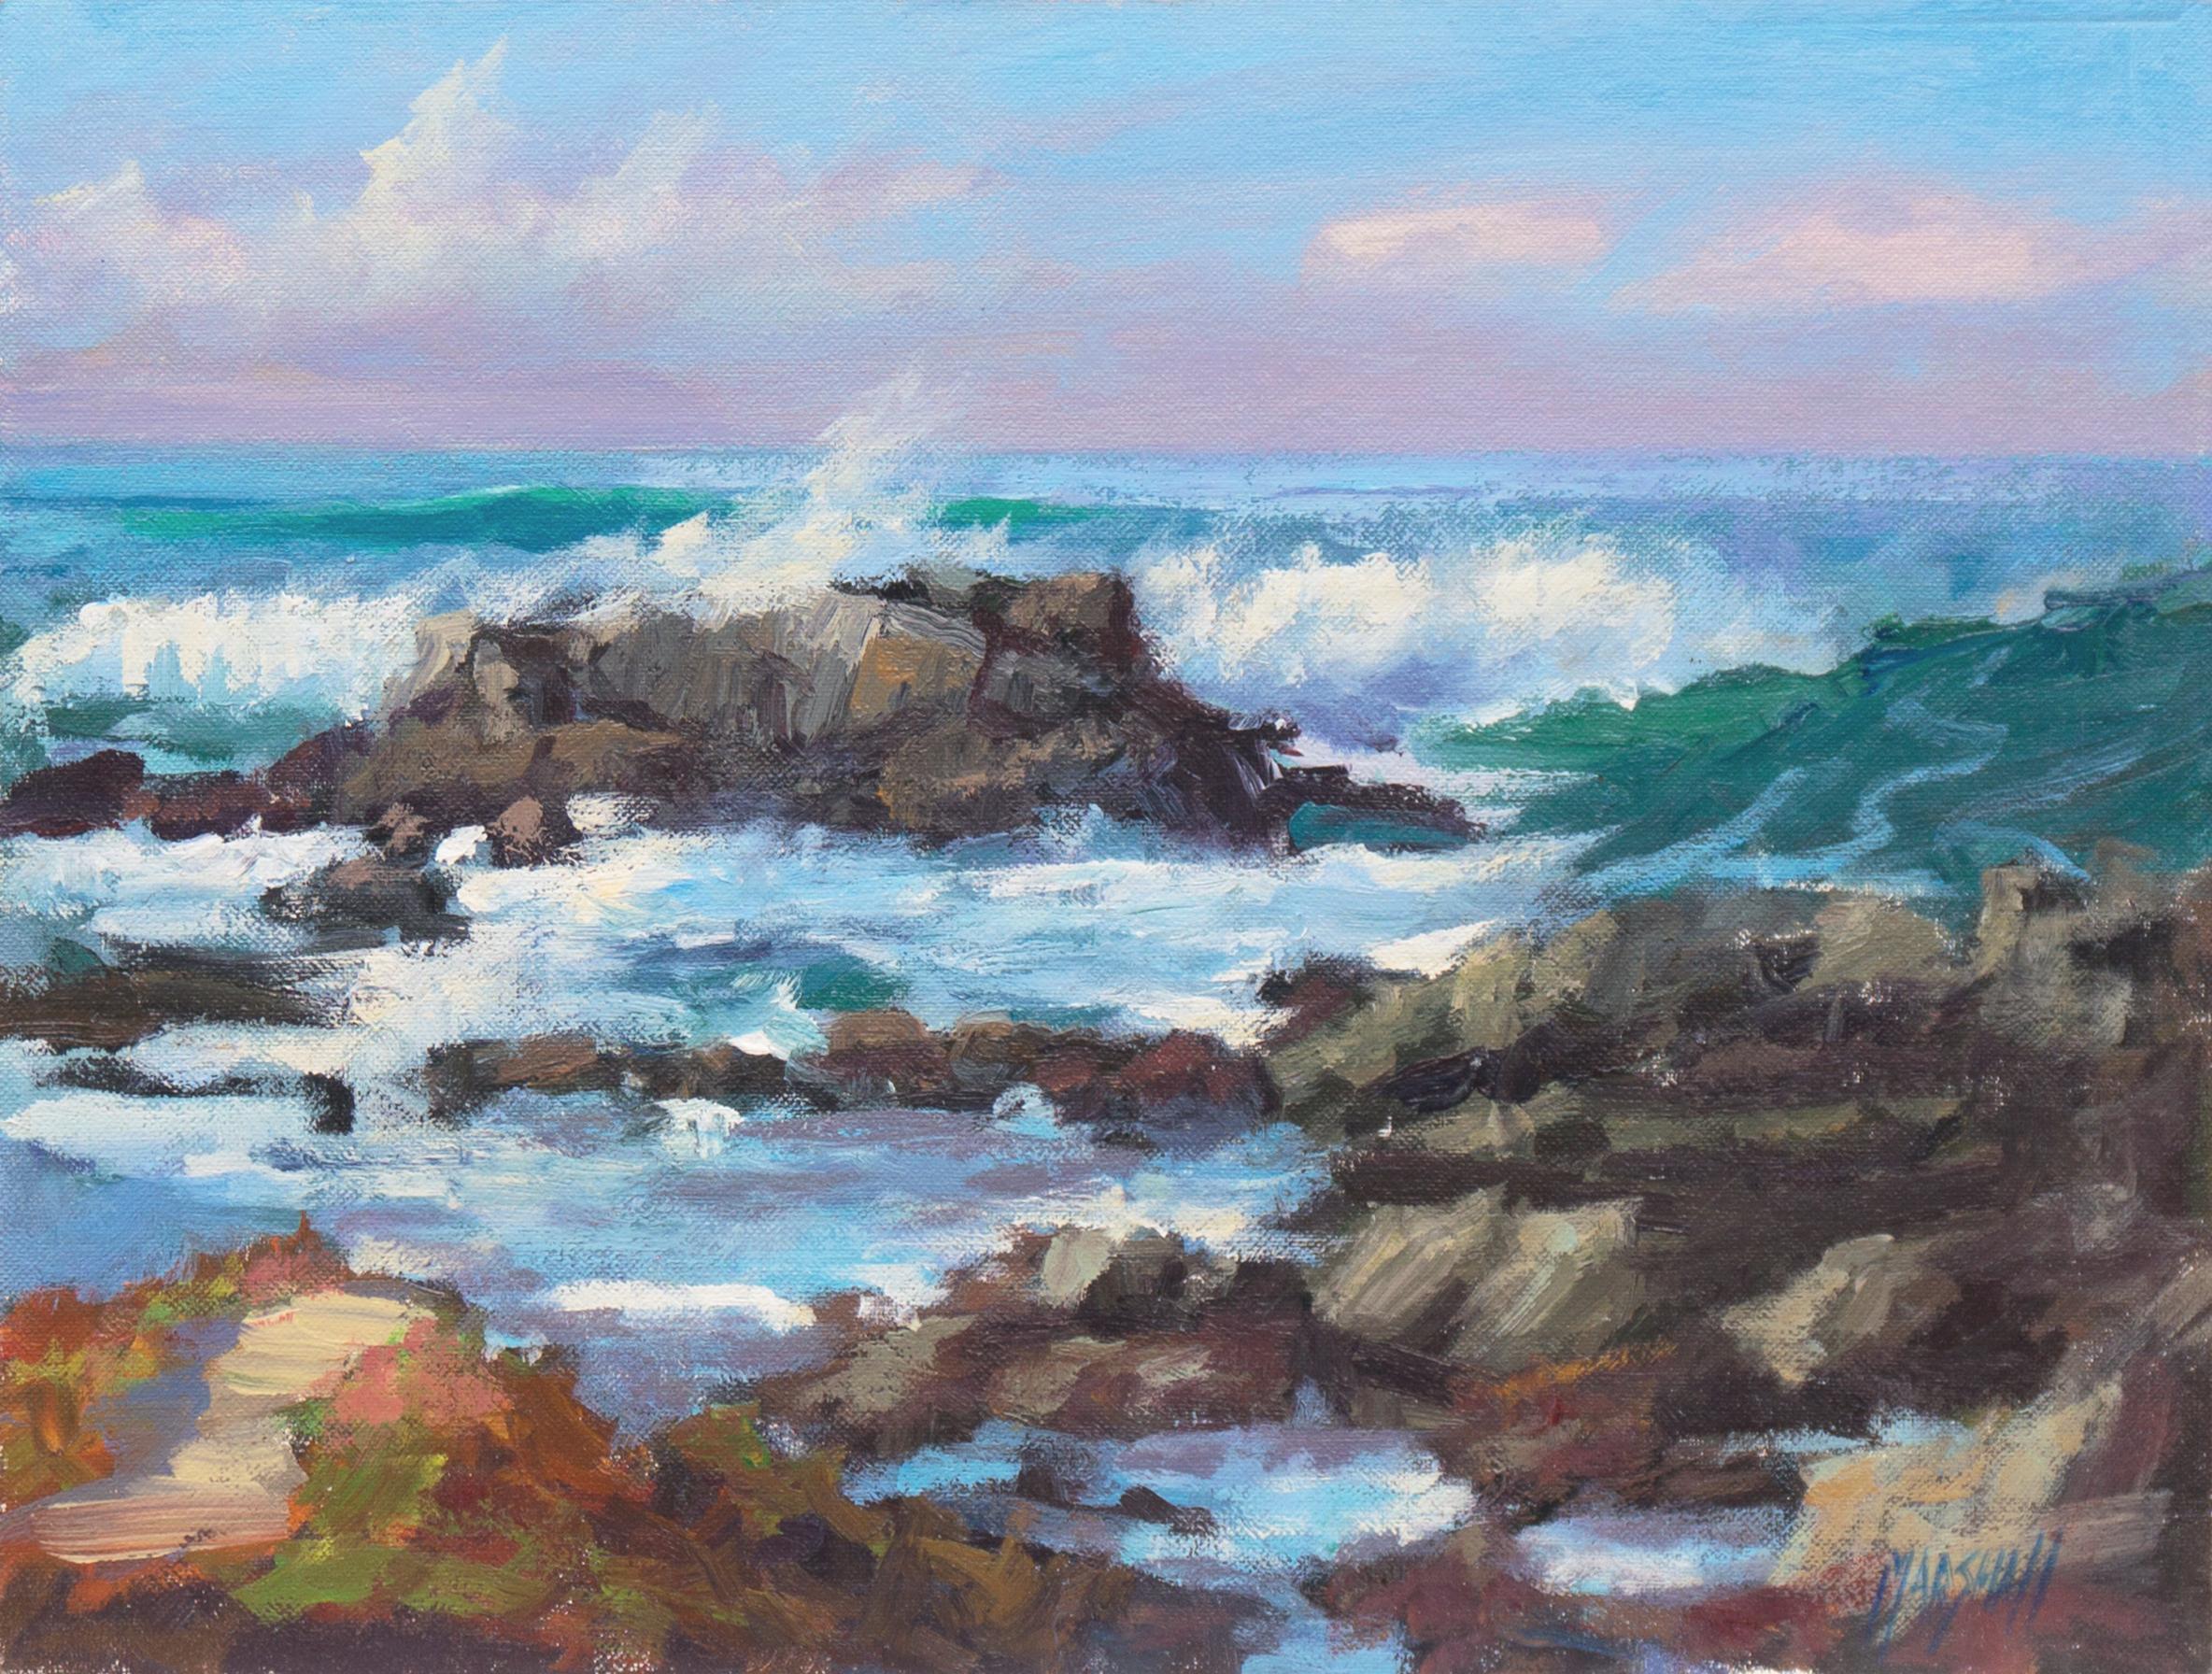 Barry Marshall Landscape Painting - 'Breaking Waves, Pacific Grove, Monterey', Carmel, Rockport Art Association